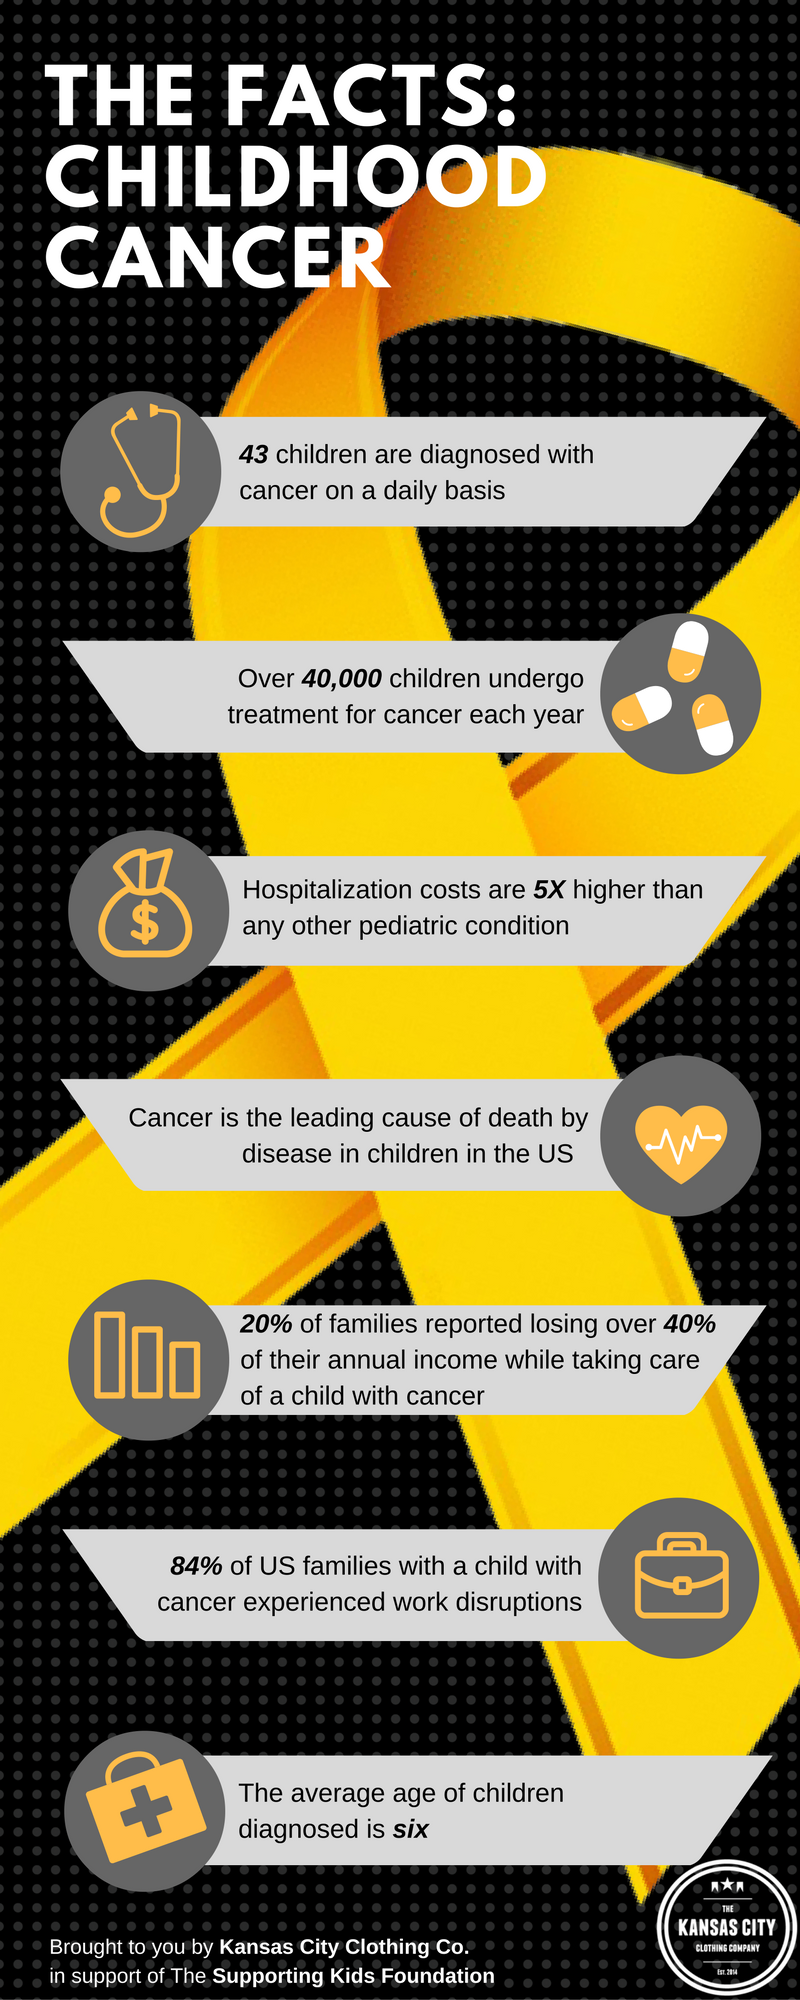 The Facts: Childhood Cancer